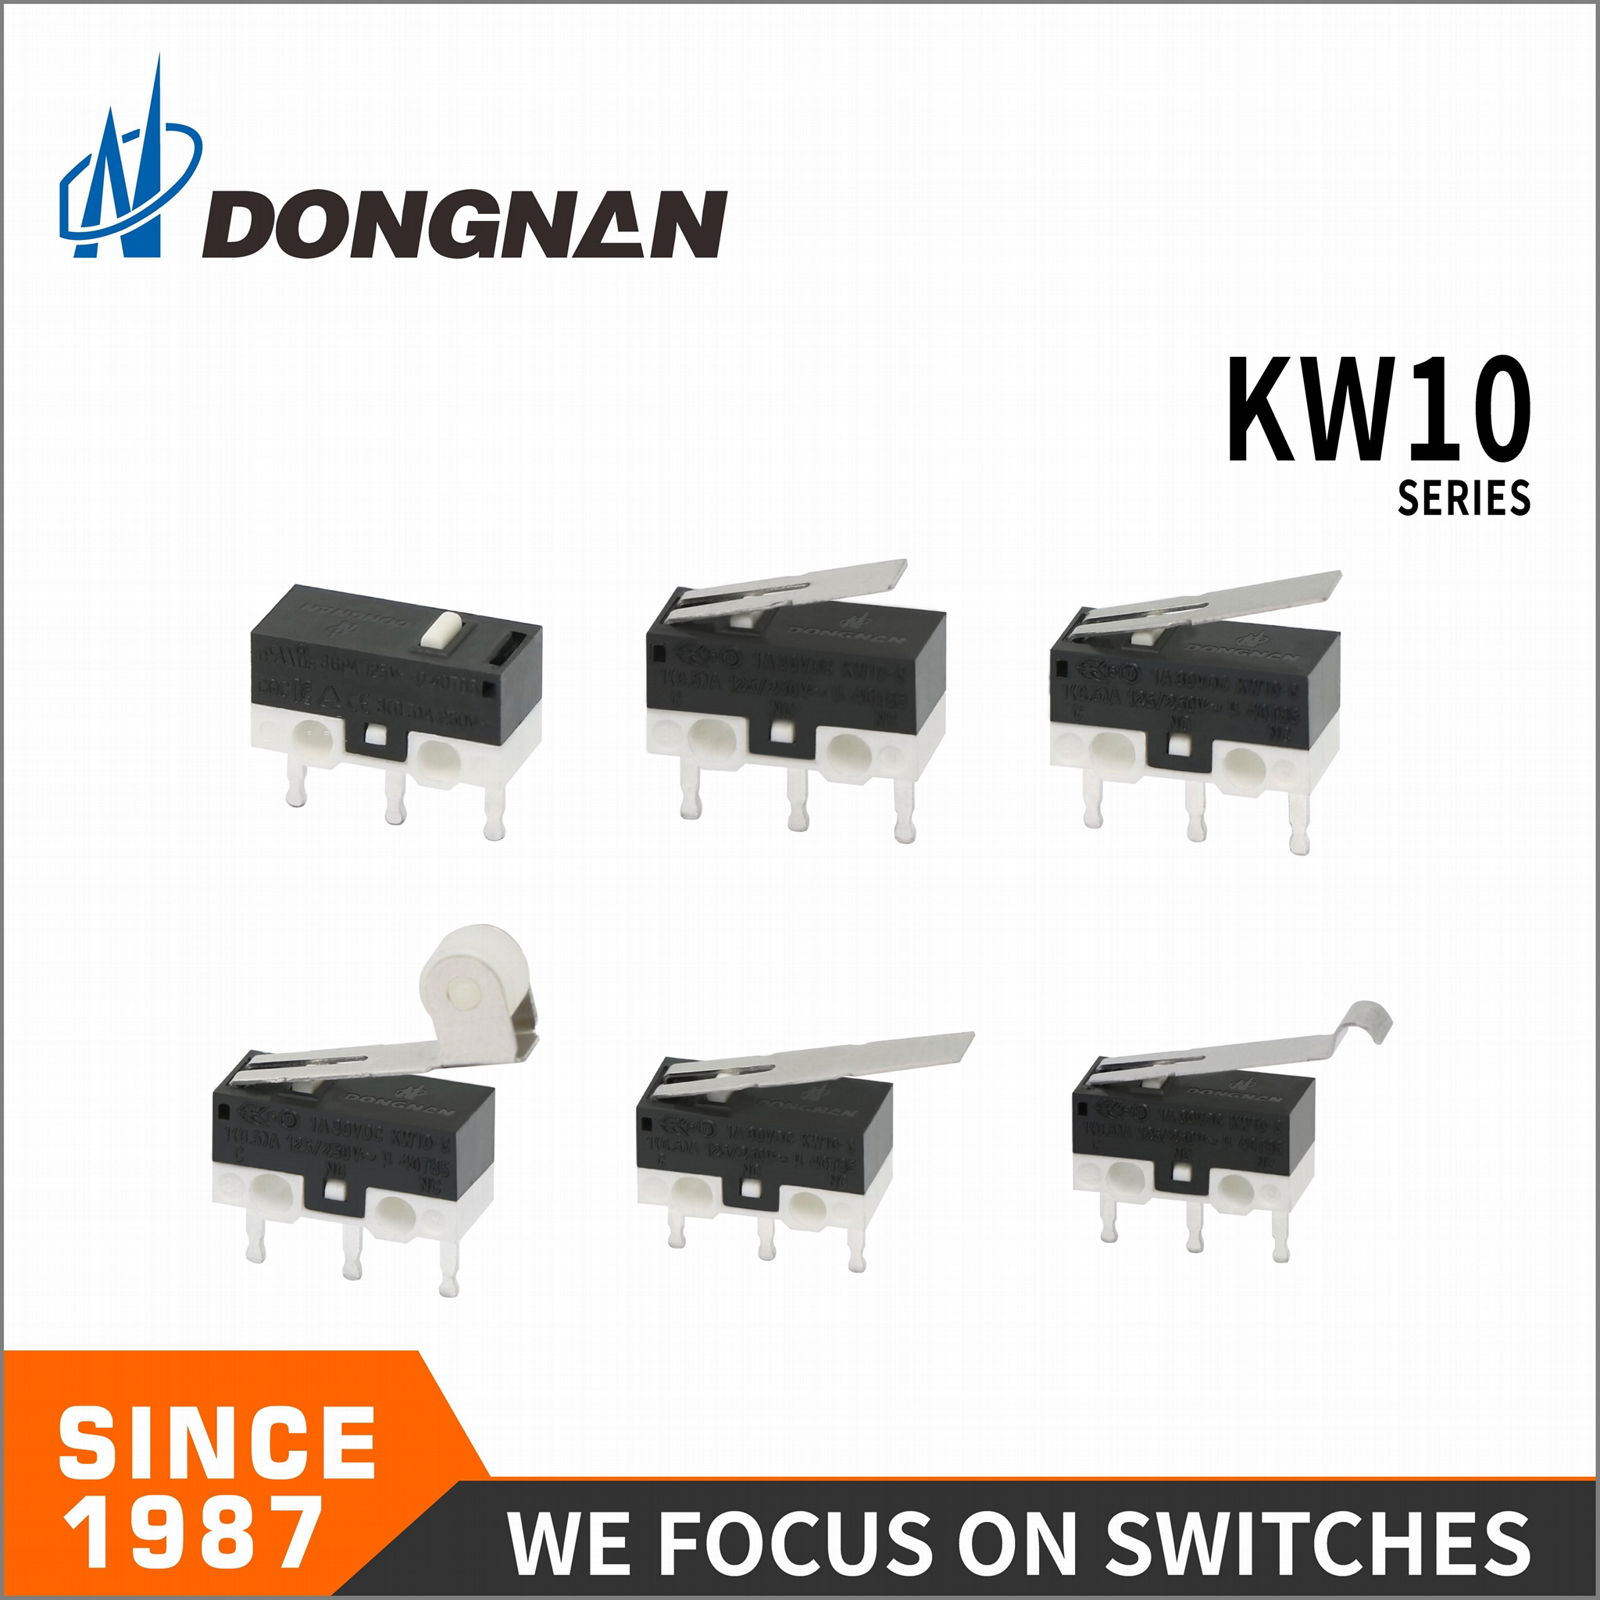 Used in Home Appliance, Audio Video Device, Computer Subminiature  Micro Switch 5